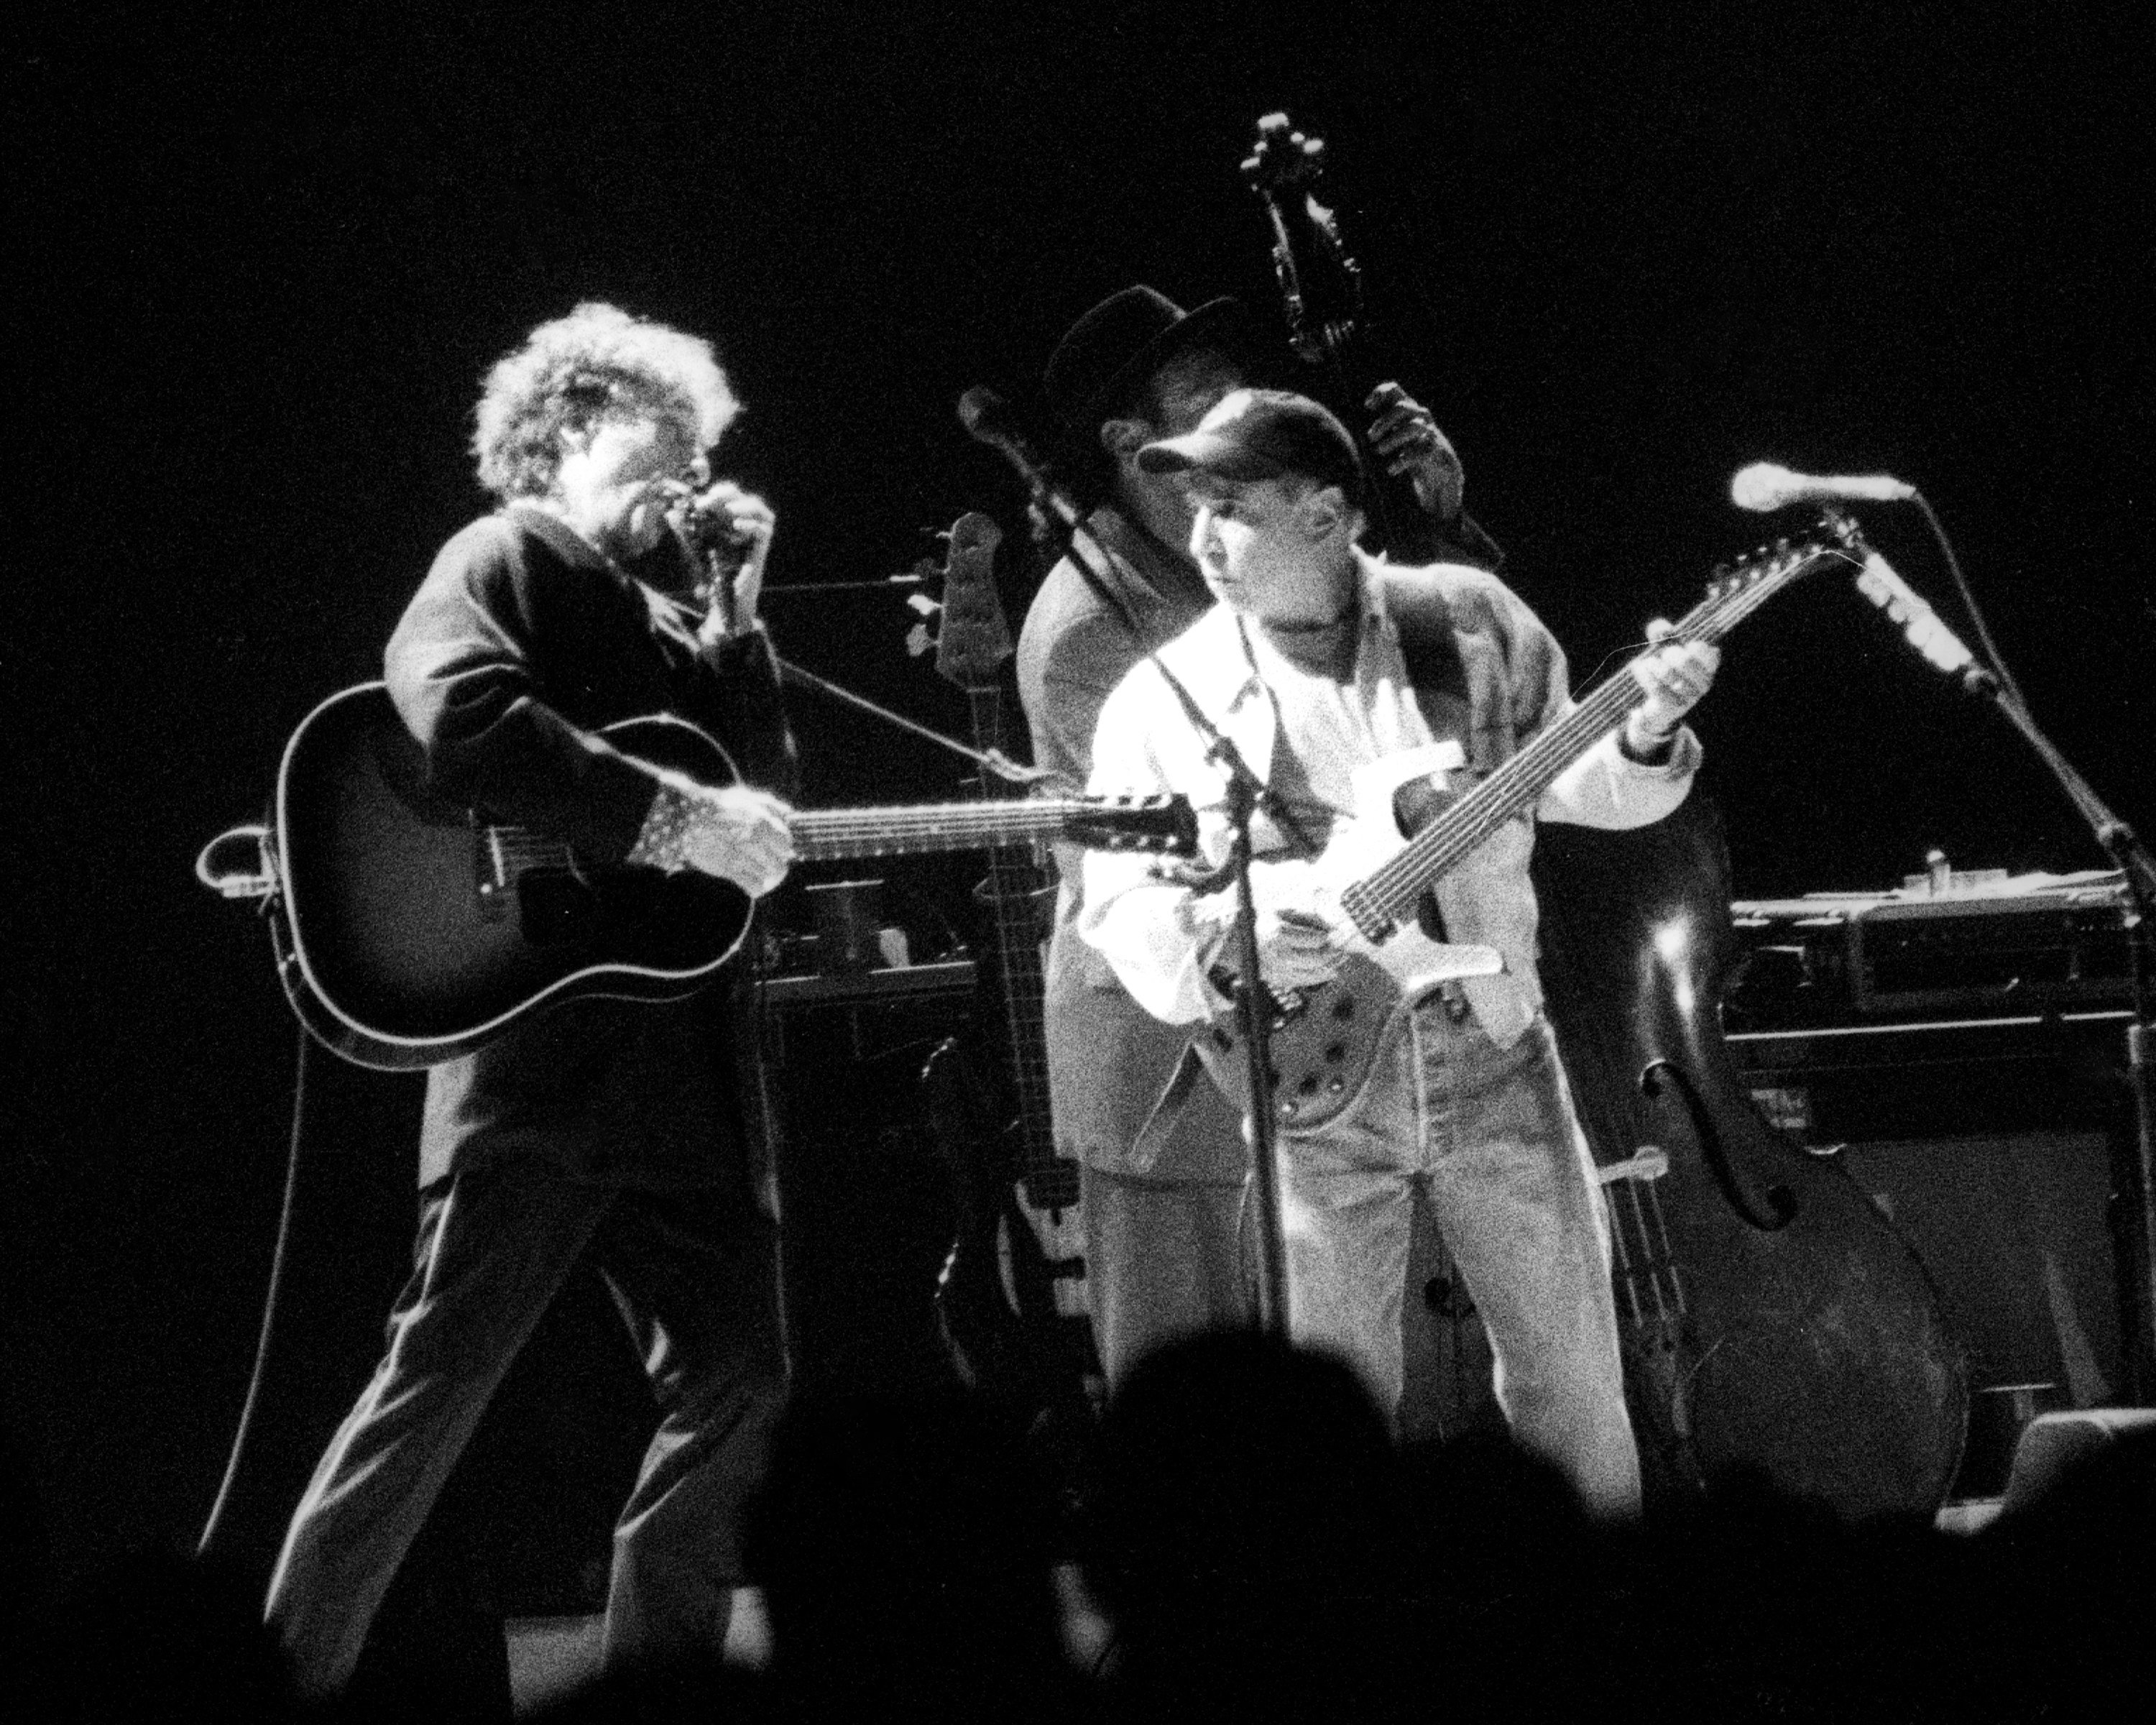 A black and white picture of Bob Dylan and Paul Simon playing guitars onstage together.